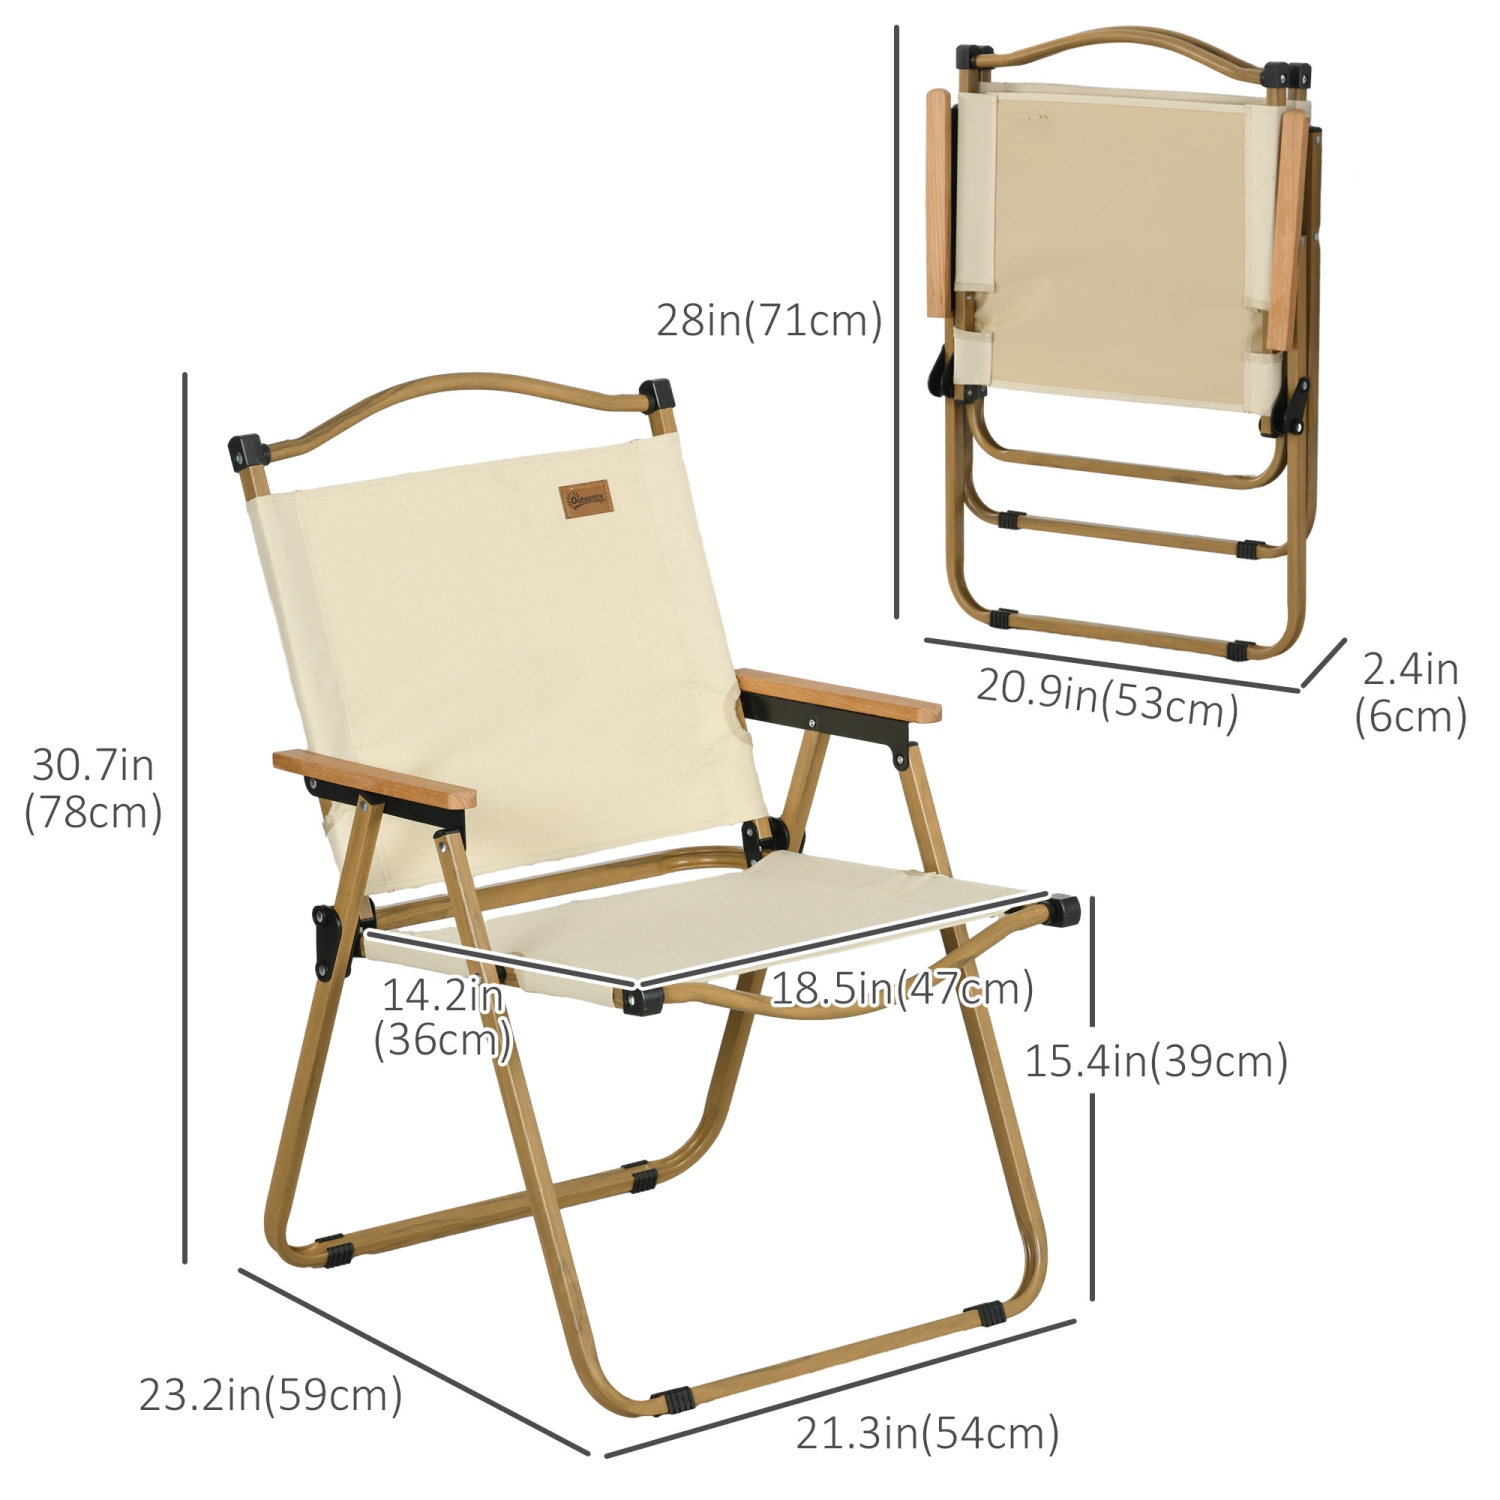 Outsunny Set of 2 Camping Chair, Lightweight Folding Chair